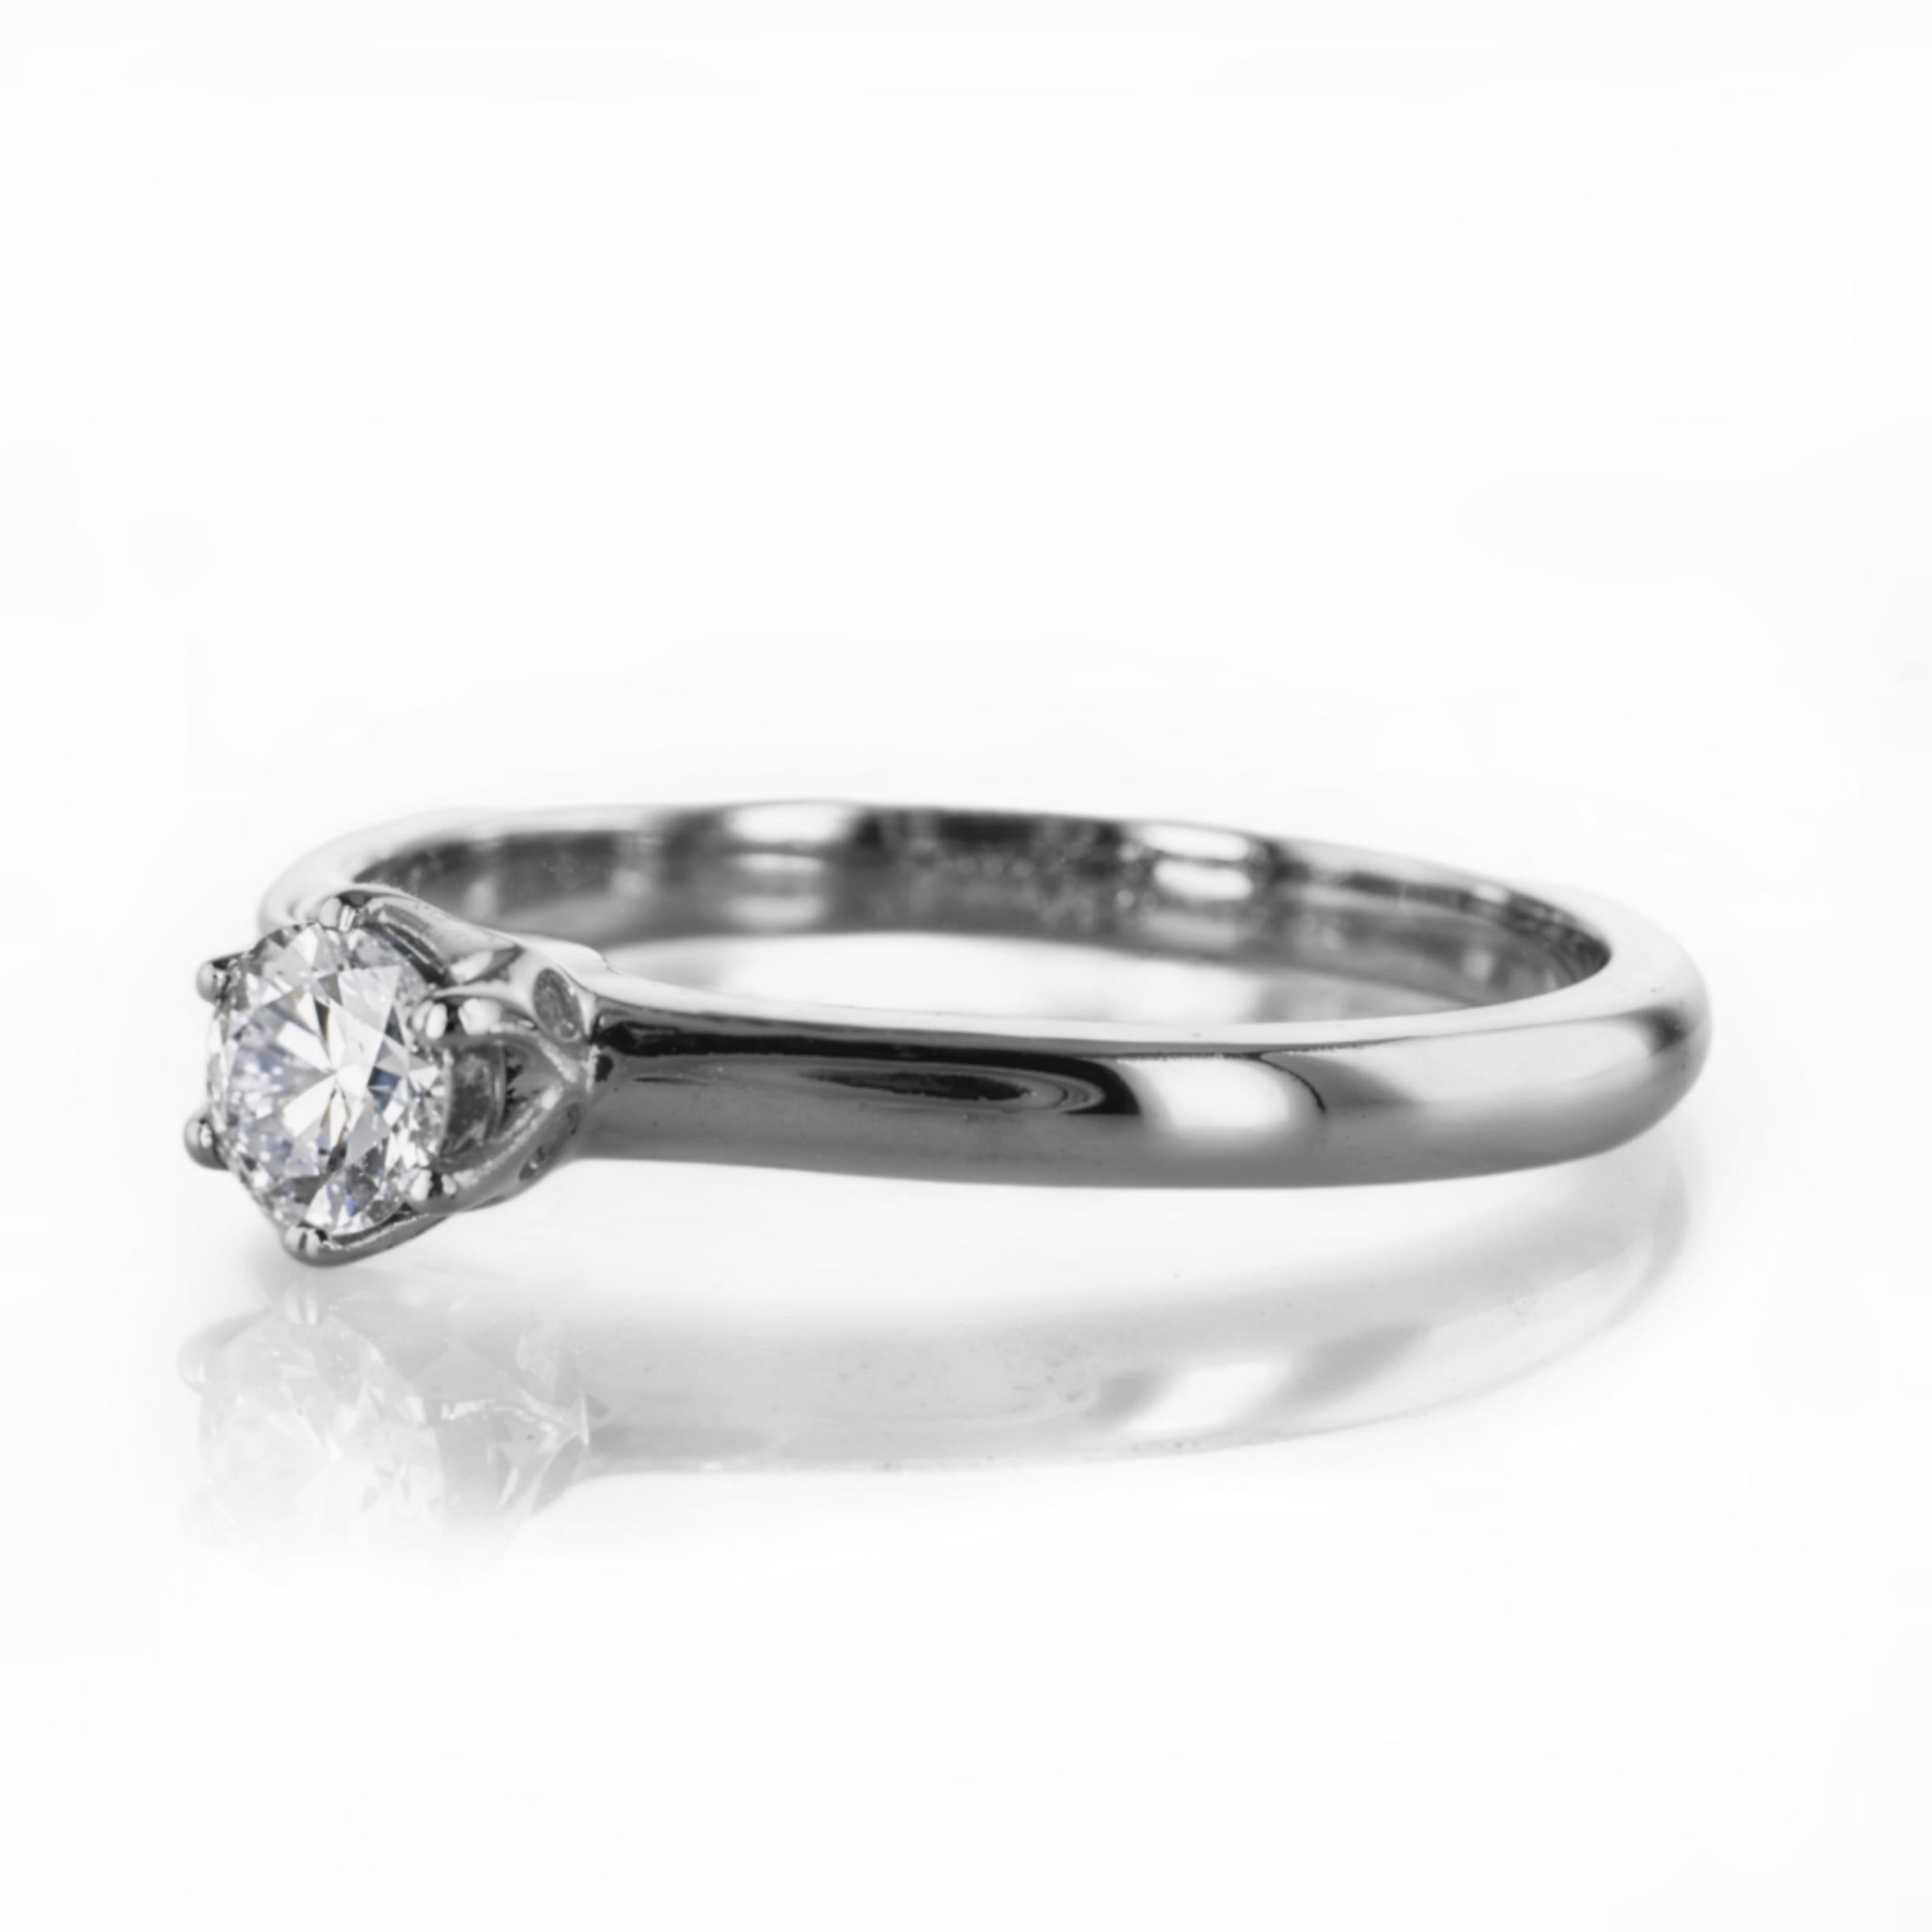 For Sale:  Stunning Classic 0.25 Carat Diamond Solitaire Ring in 14K Gold 6